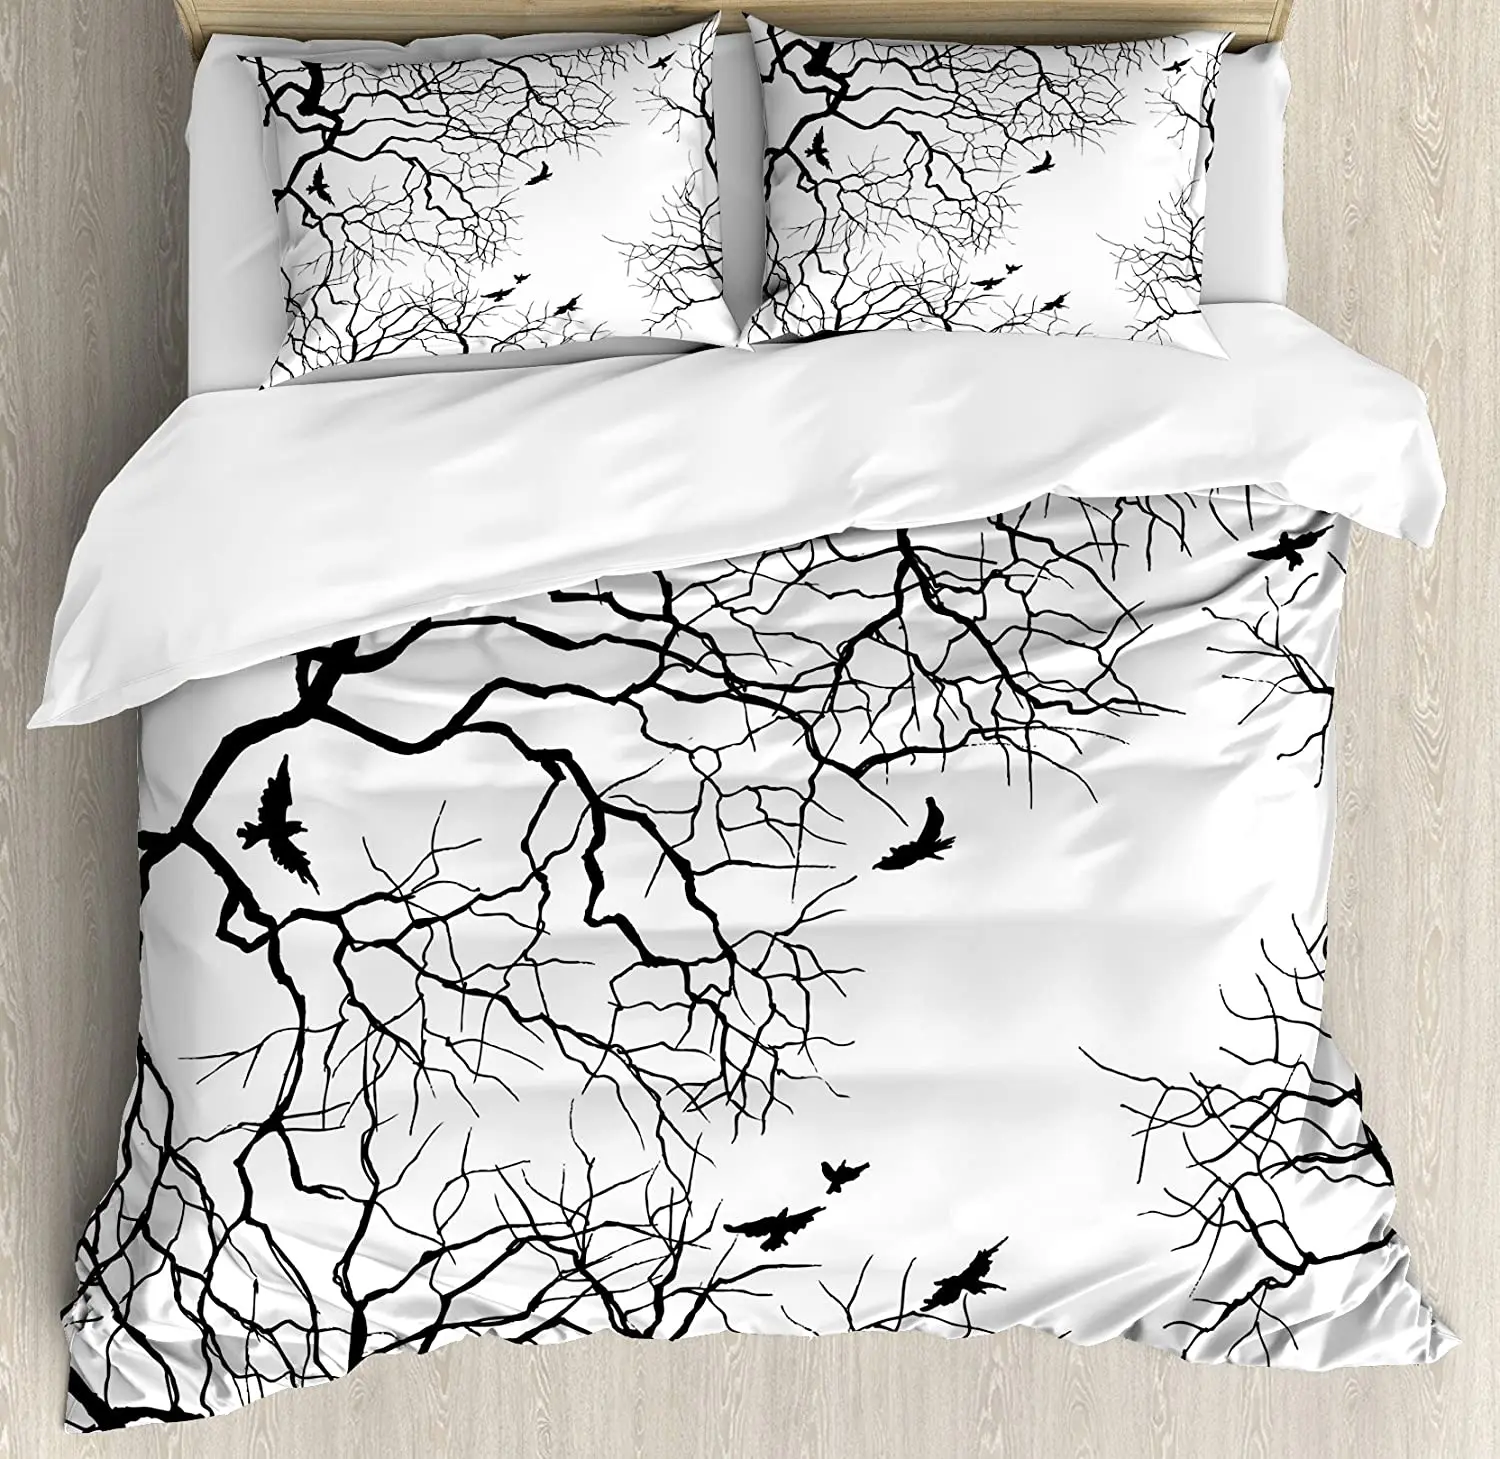 

Nature Decor Double Bed Duvet Cover Set Birds Flying over Twiggy Tree Branches Stylish Autumn Season Sky View Art Bedding Set